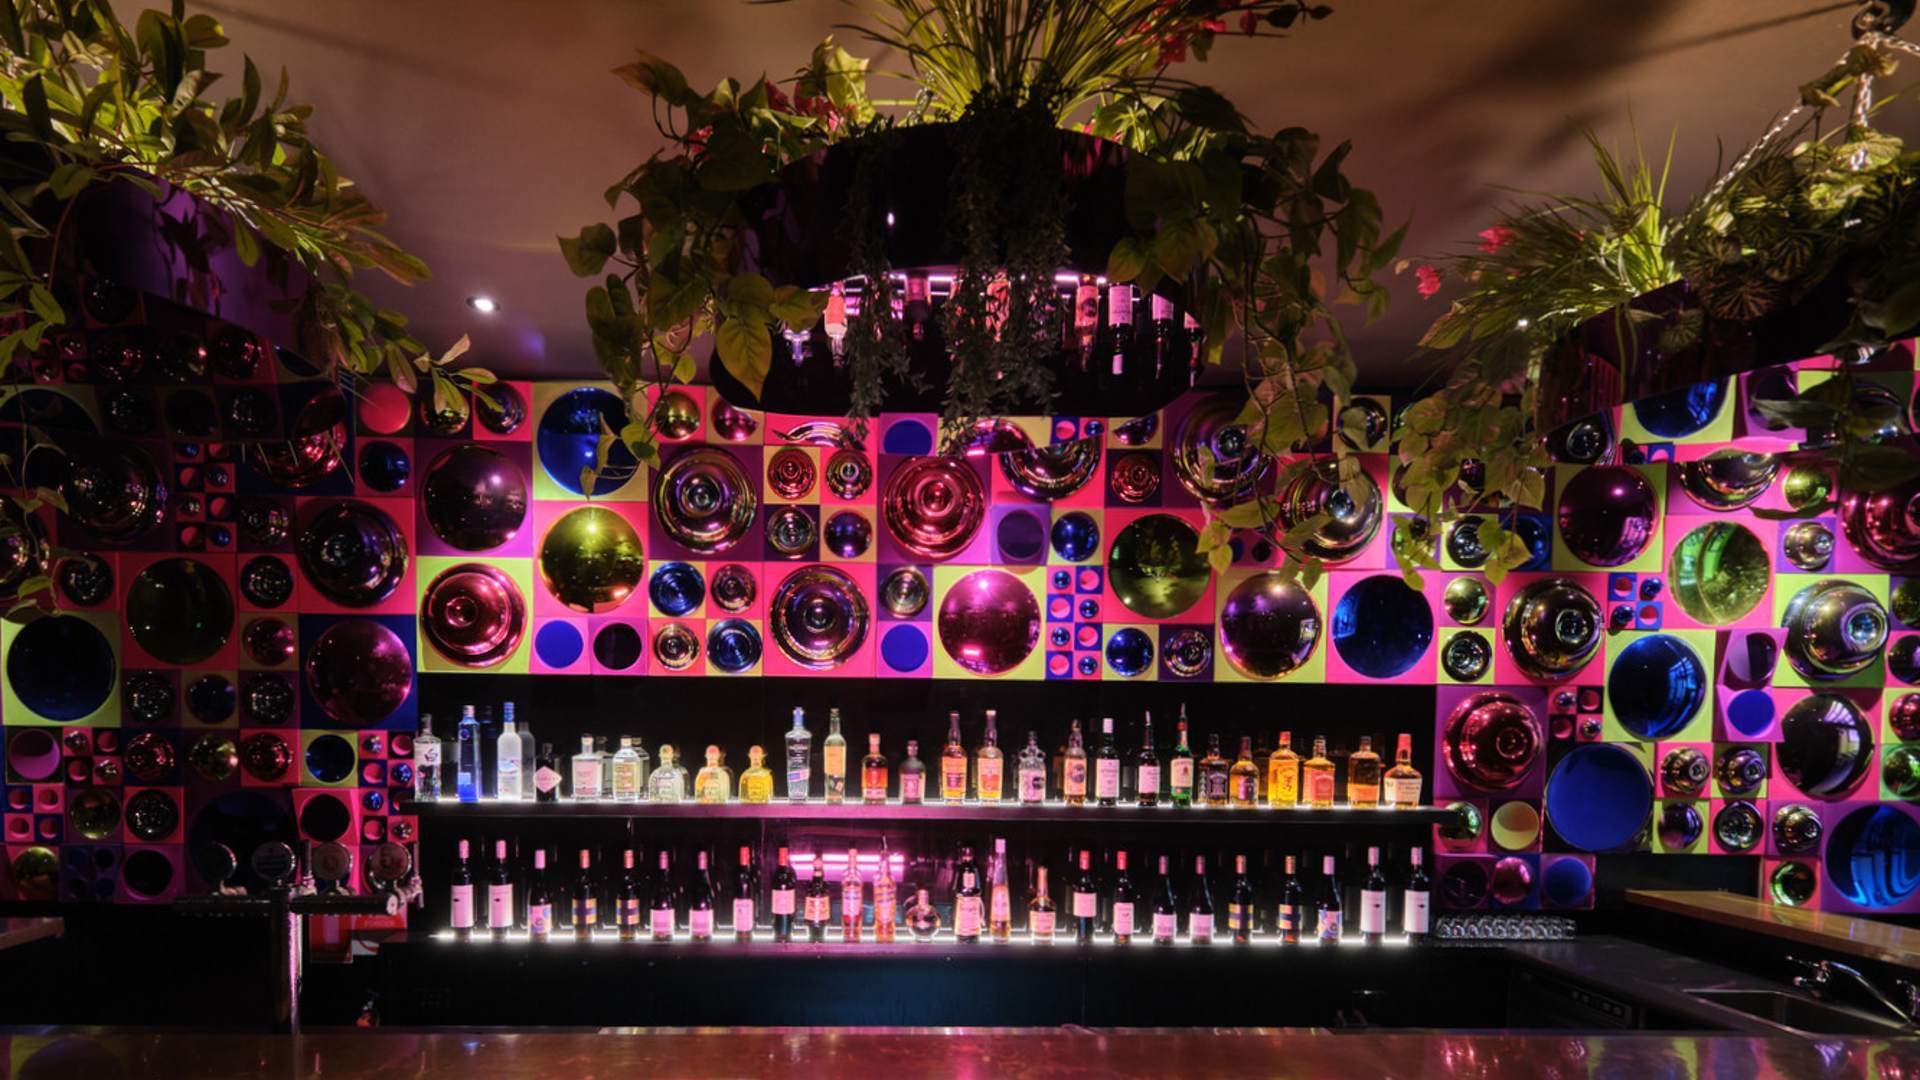 Ready to Party: The Gertrude Hotel Has Scored an Edgy and Bold Glam-Rock Makeover